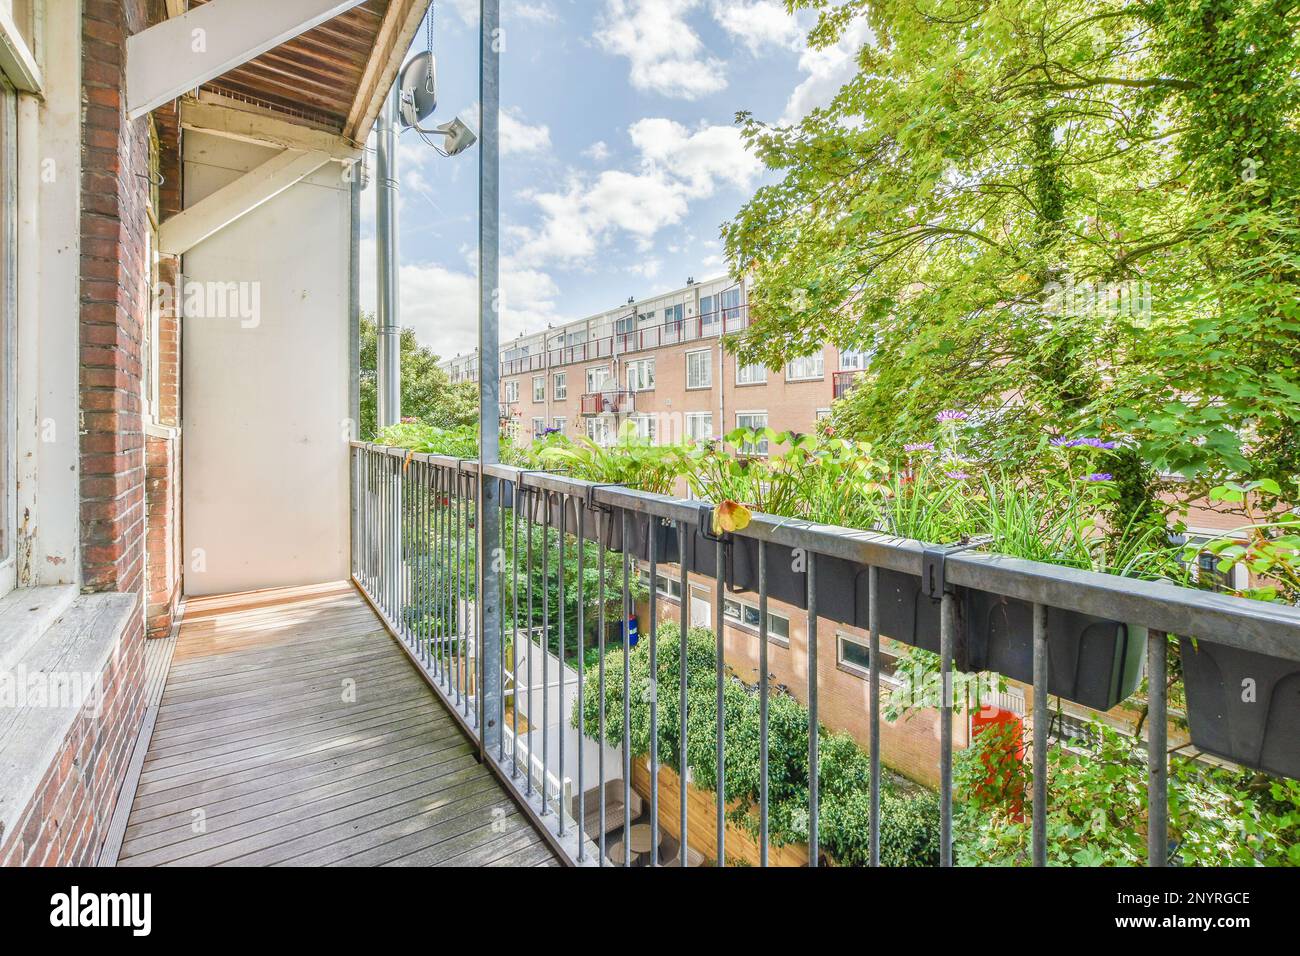 Amsterdam, Netherlands - 10 April, 2021: an apartment balcony with plants and flowers on the balk's front porch in new york, n y Stock Photo